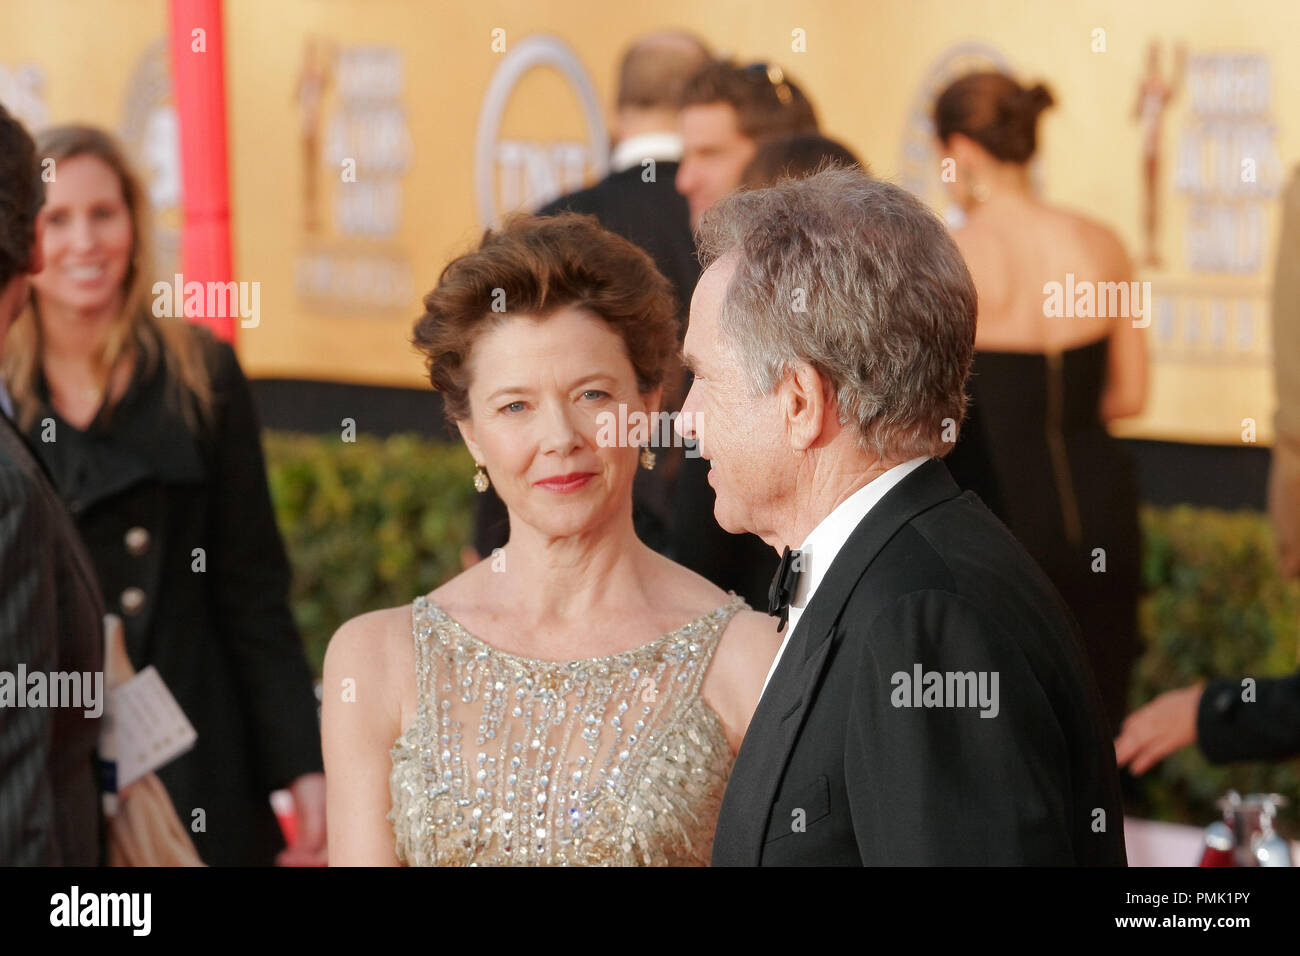 Annette Bening and Warren Beatty at the 17th Annual Screen Actors Guild Awards. Arrivals held at the Shrine Exposition Center in Los Angeles, CA, January 30, 2011. Photo by Joe Martinez / PictureLux Stock Photo